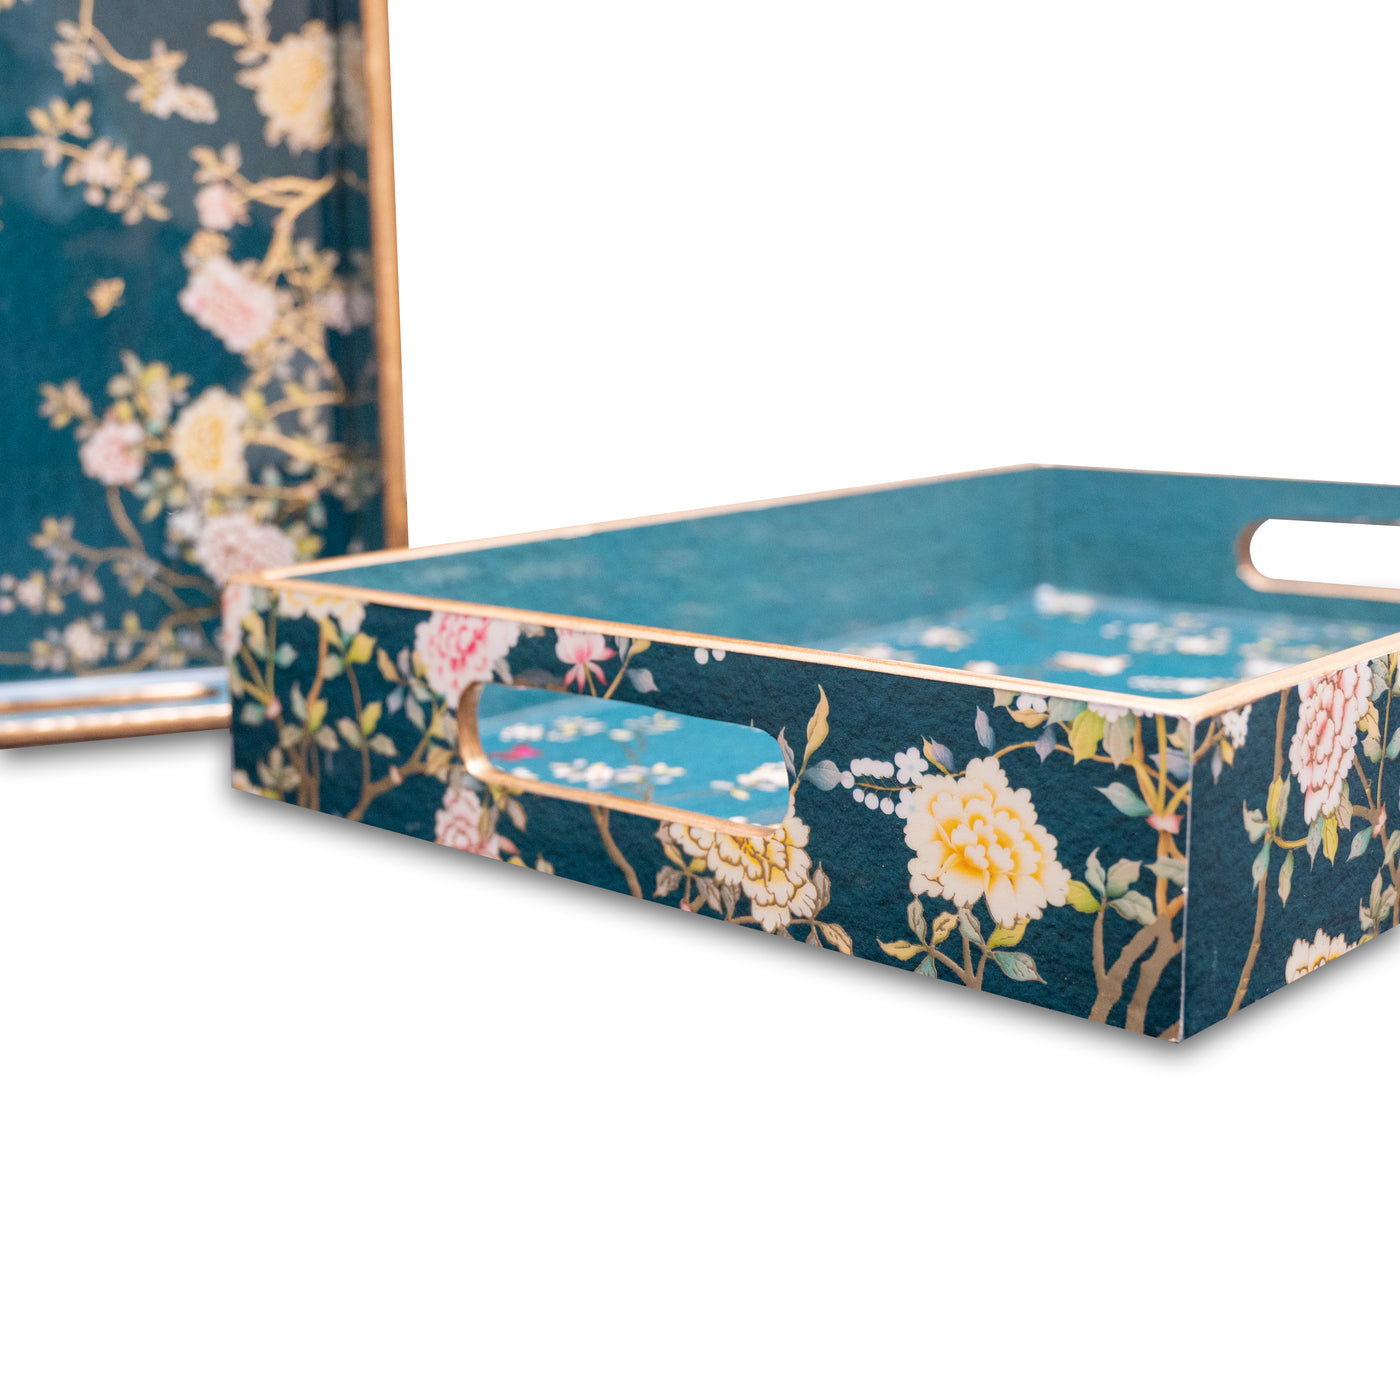 Teal and gold multipurpose trays by Home 360